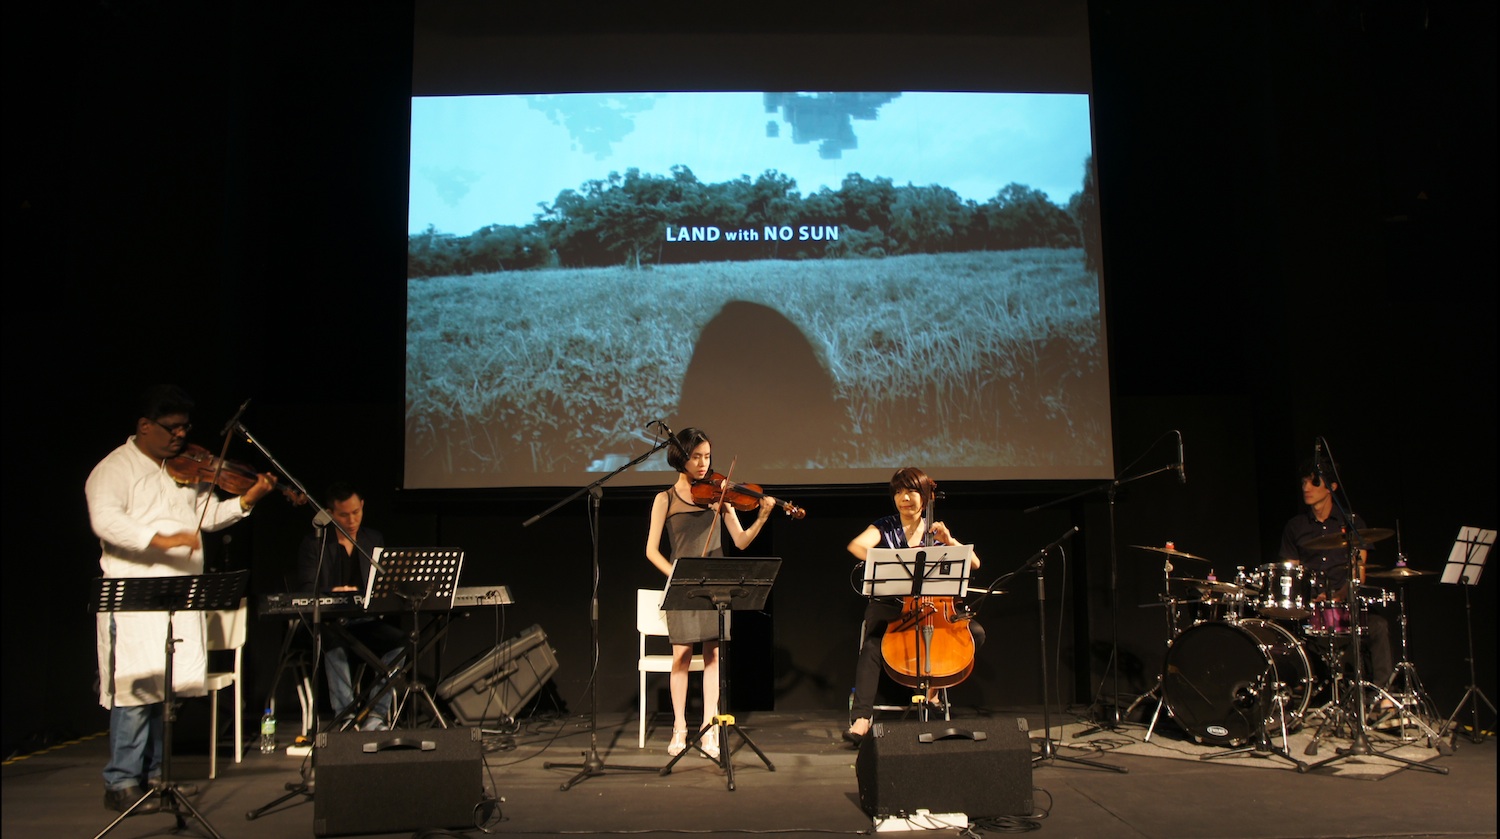  LAND with NO SUN : Whispers of the Wind performance at Titian Budaya Festival 2015 in Publika, Kuala Lumpur 